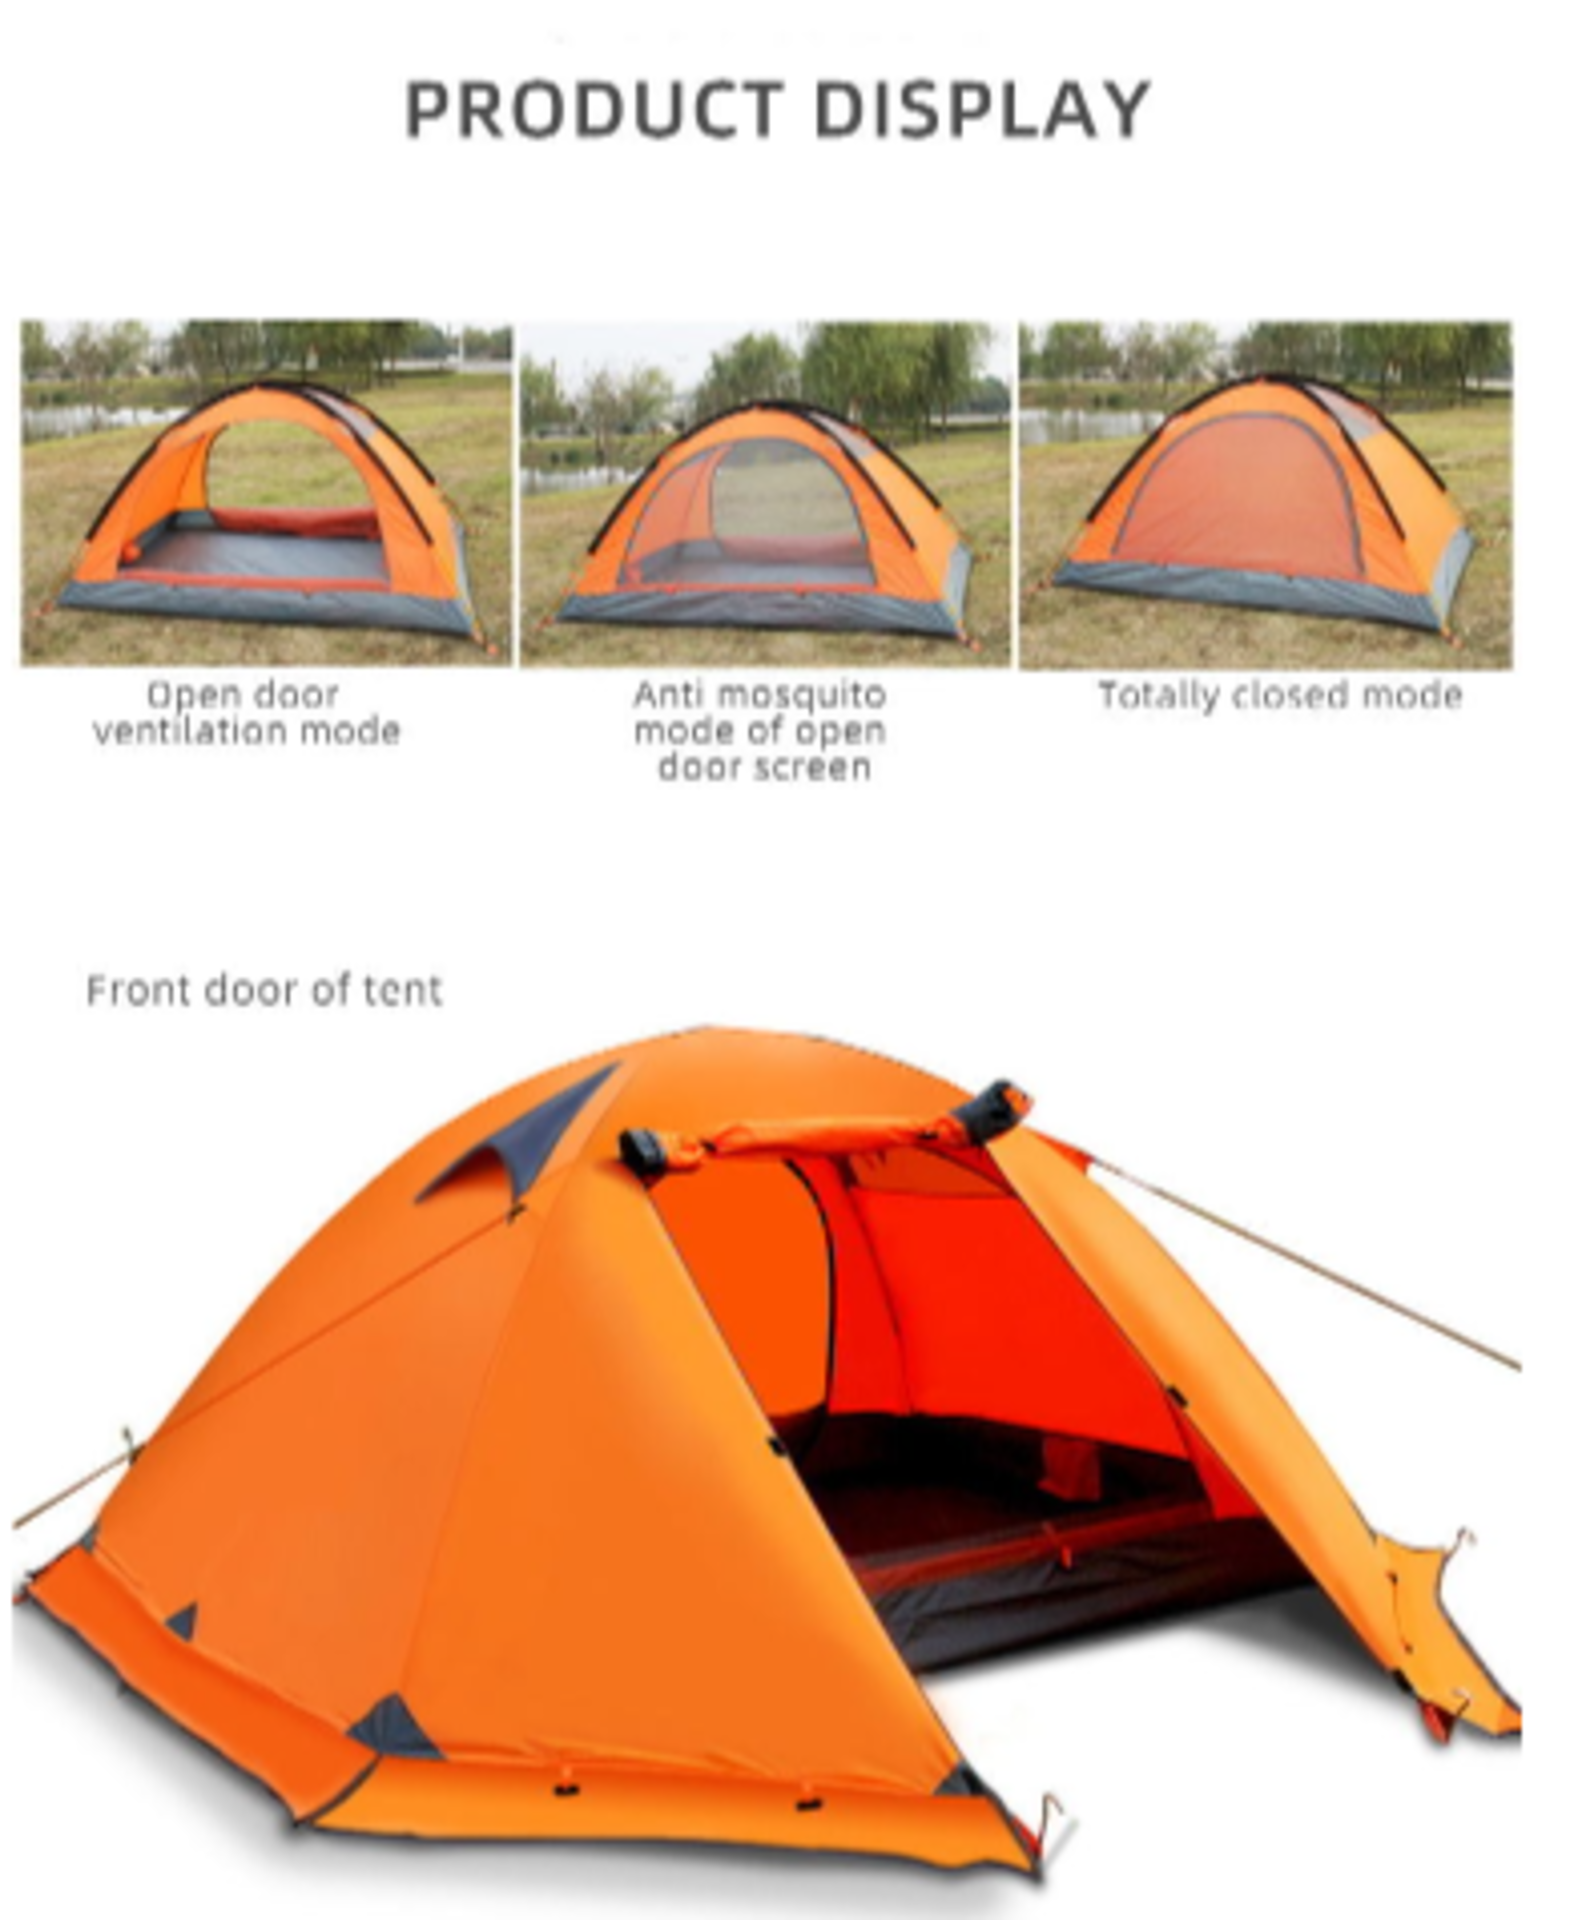 Hot Selling Waterproof 3-4 Person Outdoor Camping Backpacking Oxford Tent - Image 2 of 3